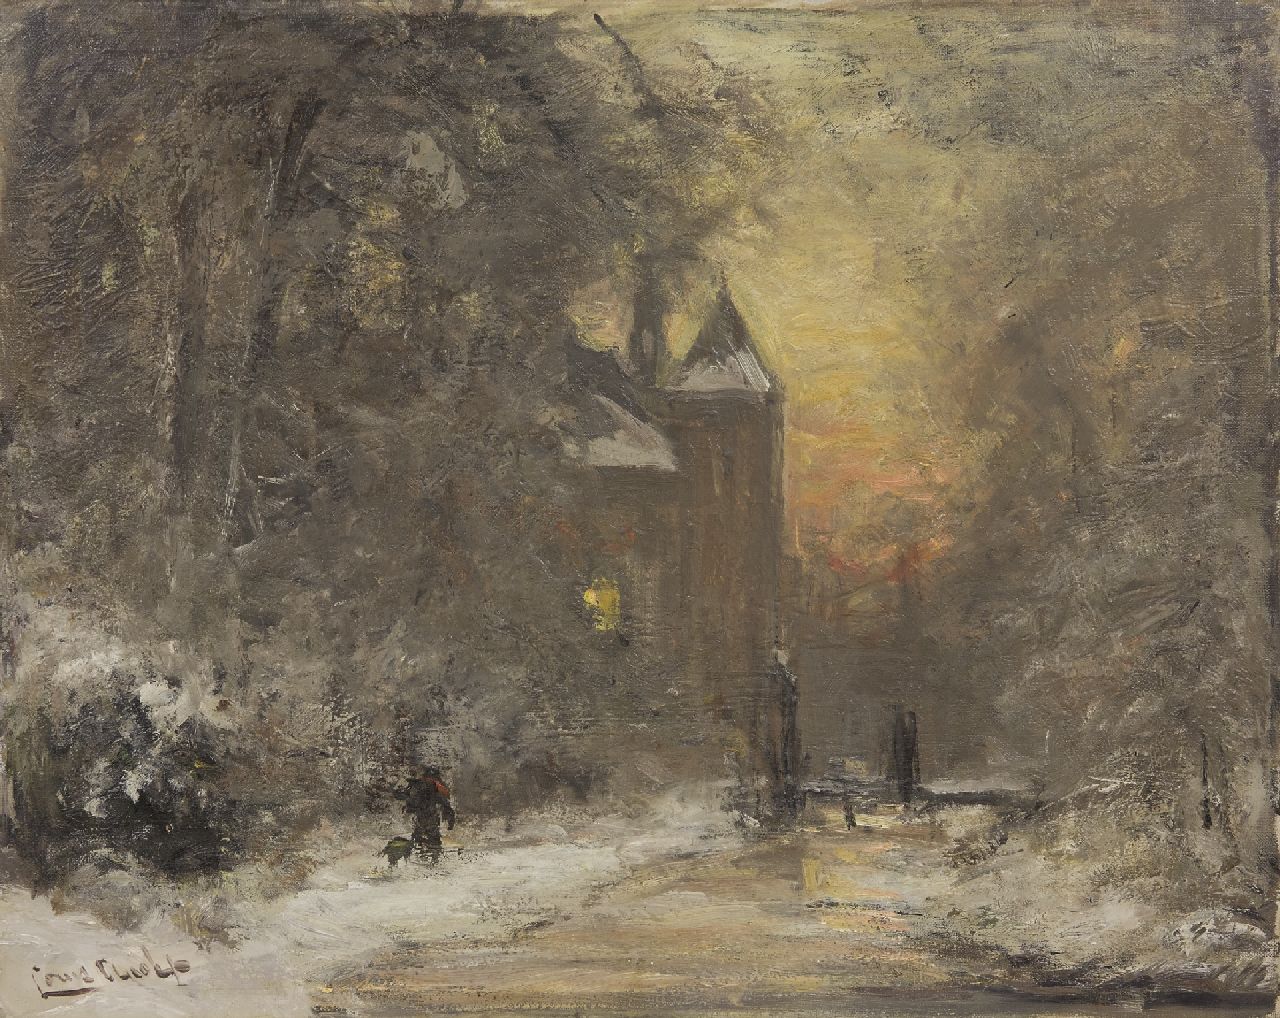 Apol L.F.H.  | Lodewijk Franciscus Hendrik 'Louis' Apol, A winter landscape with a man and his dog near a castle, oil on canvas 40.5 x 50.4 cm, signed l.l.